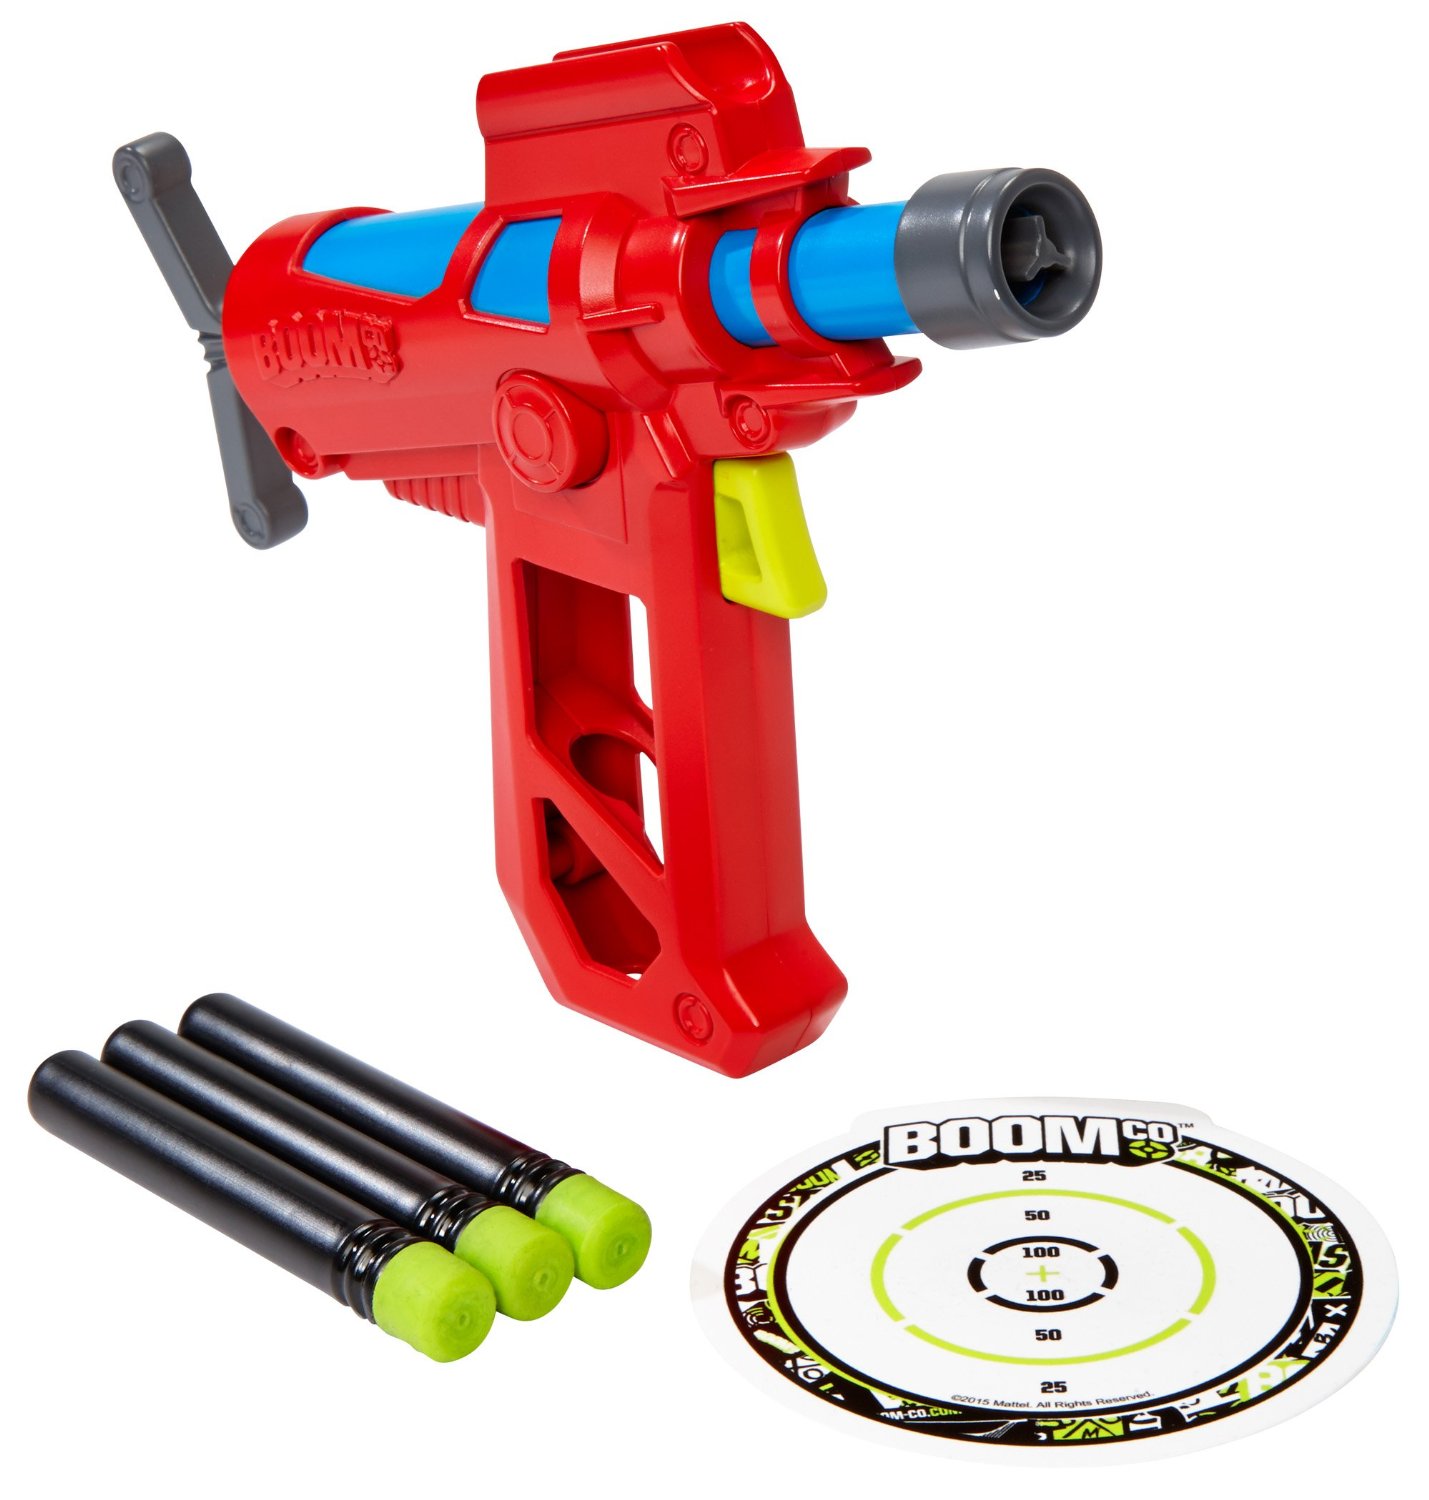 BOOMco. Thundercover Blaster – Just $2.86!